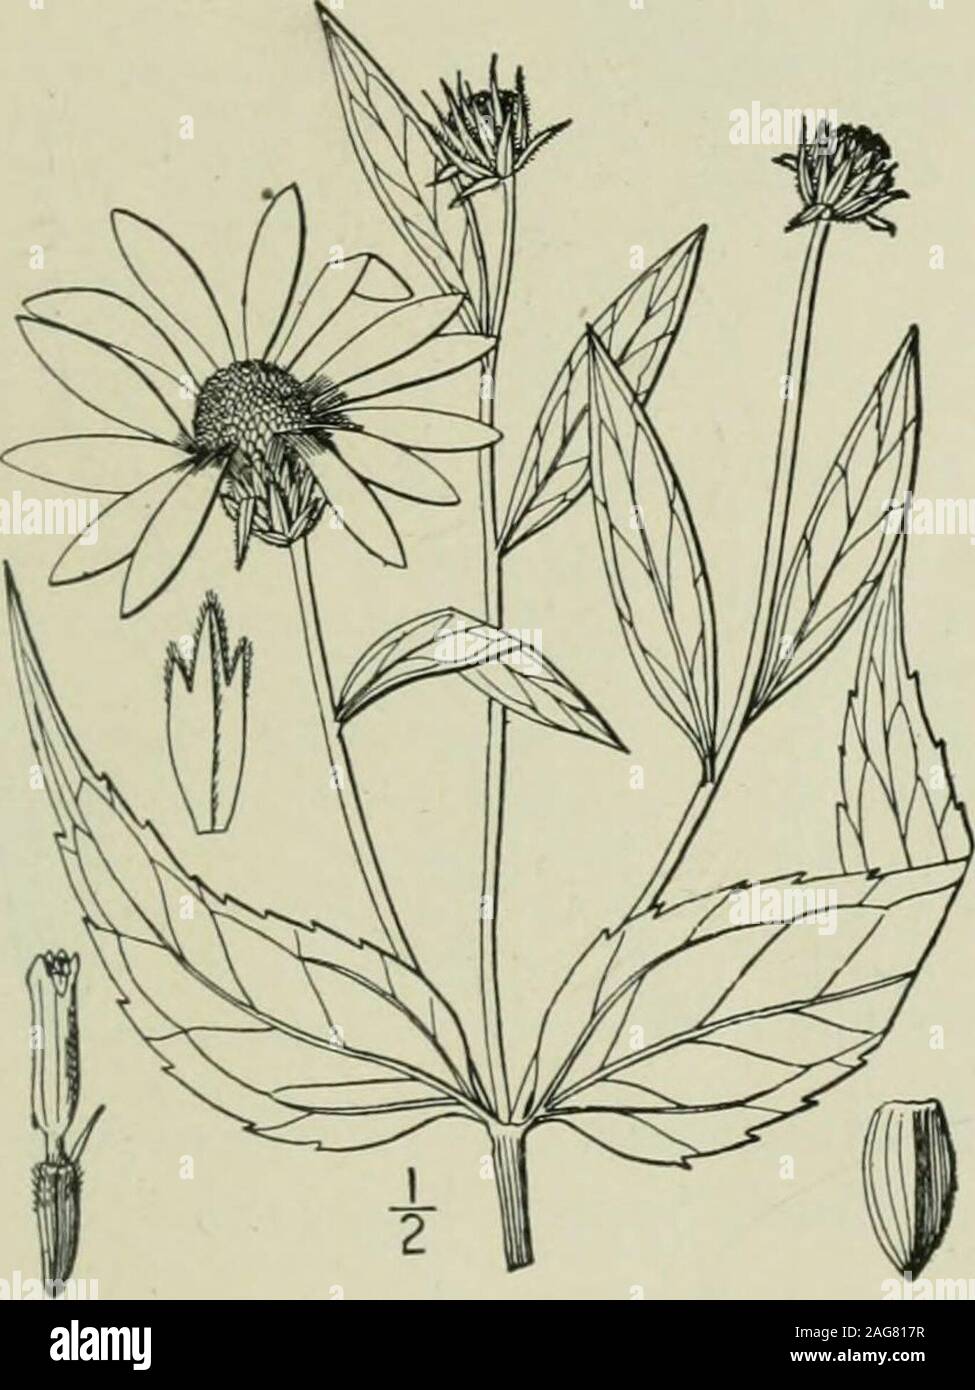 . An illustrated flora of the northern United States, Canada and the British possessions : from Newfoundland to the parallel of the southern boundary of Virginia and from the Atlantic Ocean westward to the 102nd meridian. 22. Helianthus strumosus L. Pale-leavedWood Sunflower. Fig. 4482. Helianthus strumosus L. Sp. PI. 905. 1753. H. mollis Willd. Sp. PI. 3: 2240. 1804. Not Lam. 1789. H, macrophyllus Willd. Hort. Berol. pi. /O. 1806. Perennial by branched, sometimes tuberous-thick-ened rootstocks; stem glabrous below, sometimesglaucous, 3°-?° high, branched above, the branchesusually pubescent. Stock Photo